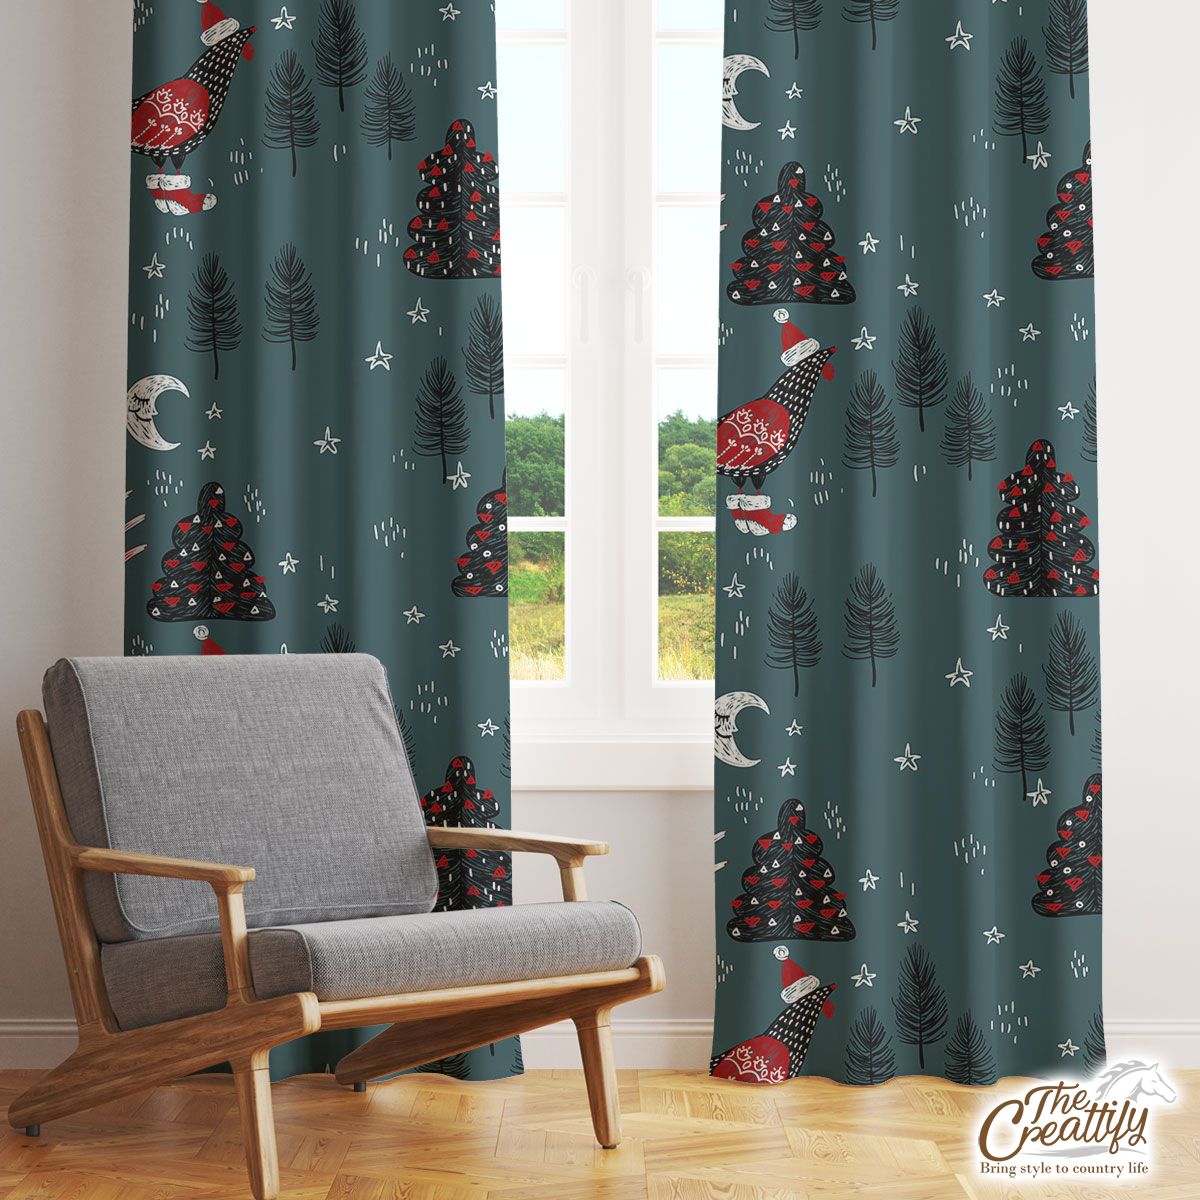 Christmas Turkey With Santa Hat, Sweater And Red Socks On The Pine Tree Background Window Curtain